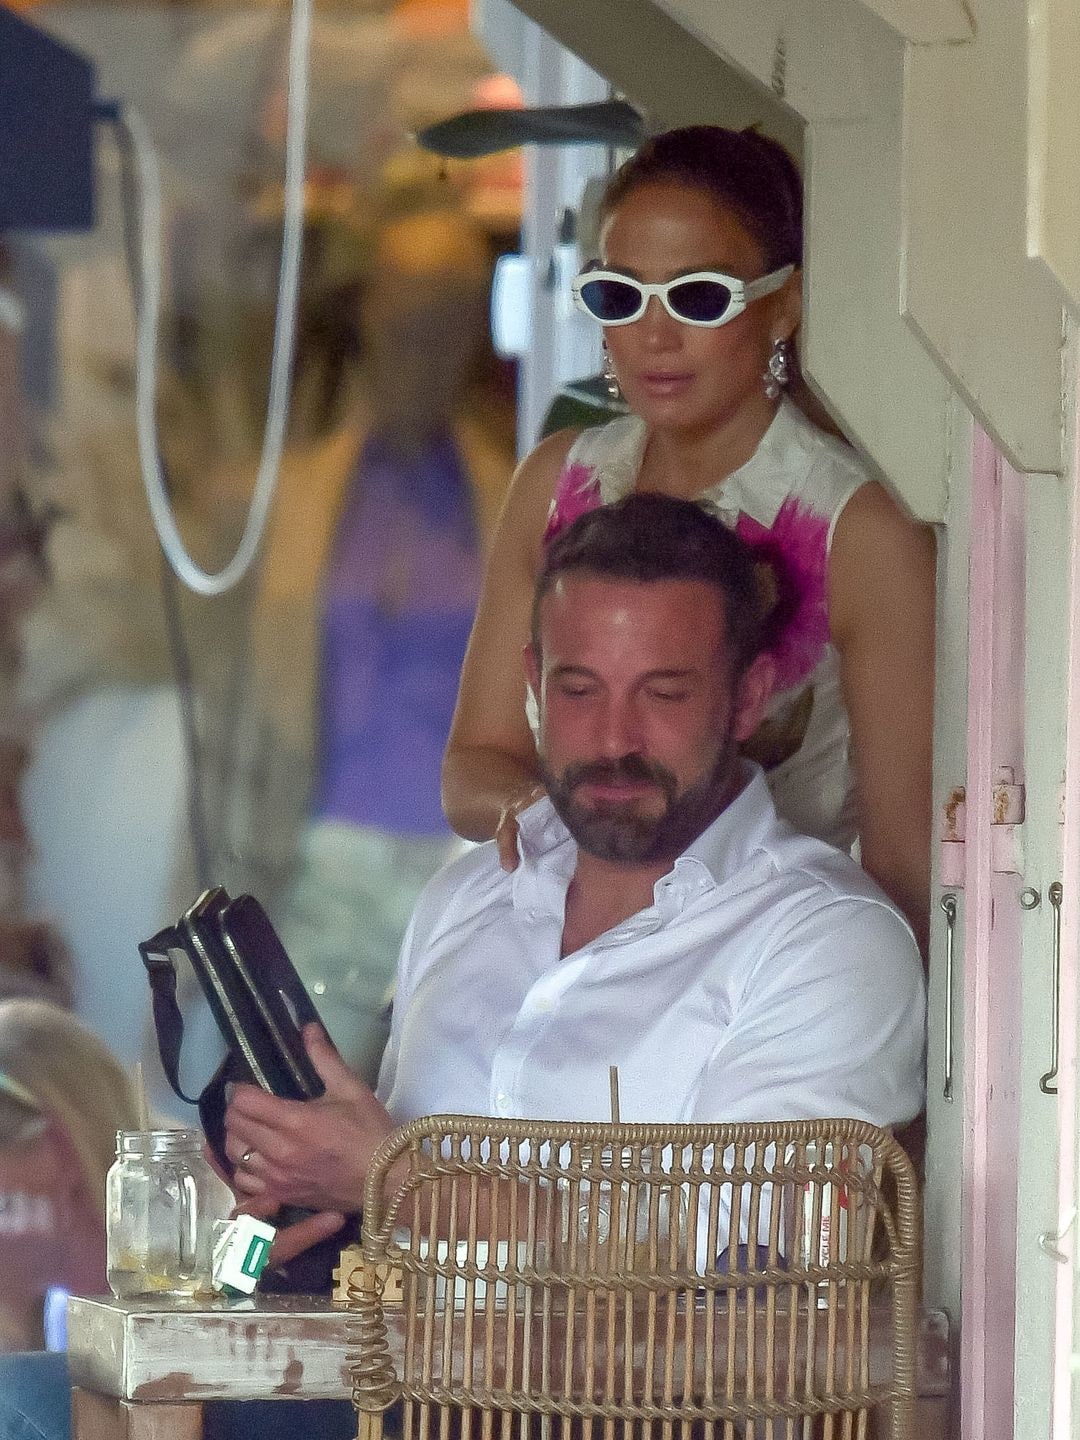 Jennifer Lopez and Ben Affleck eat lunch and Ben pays with a card from his man bag